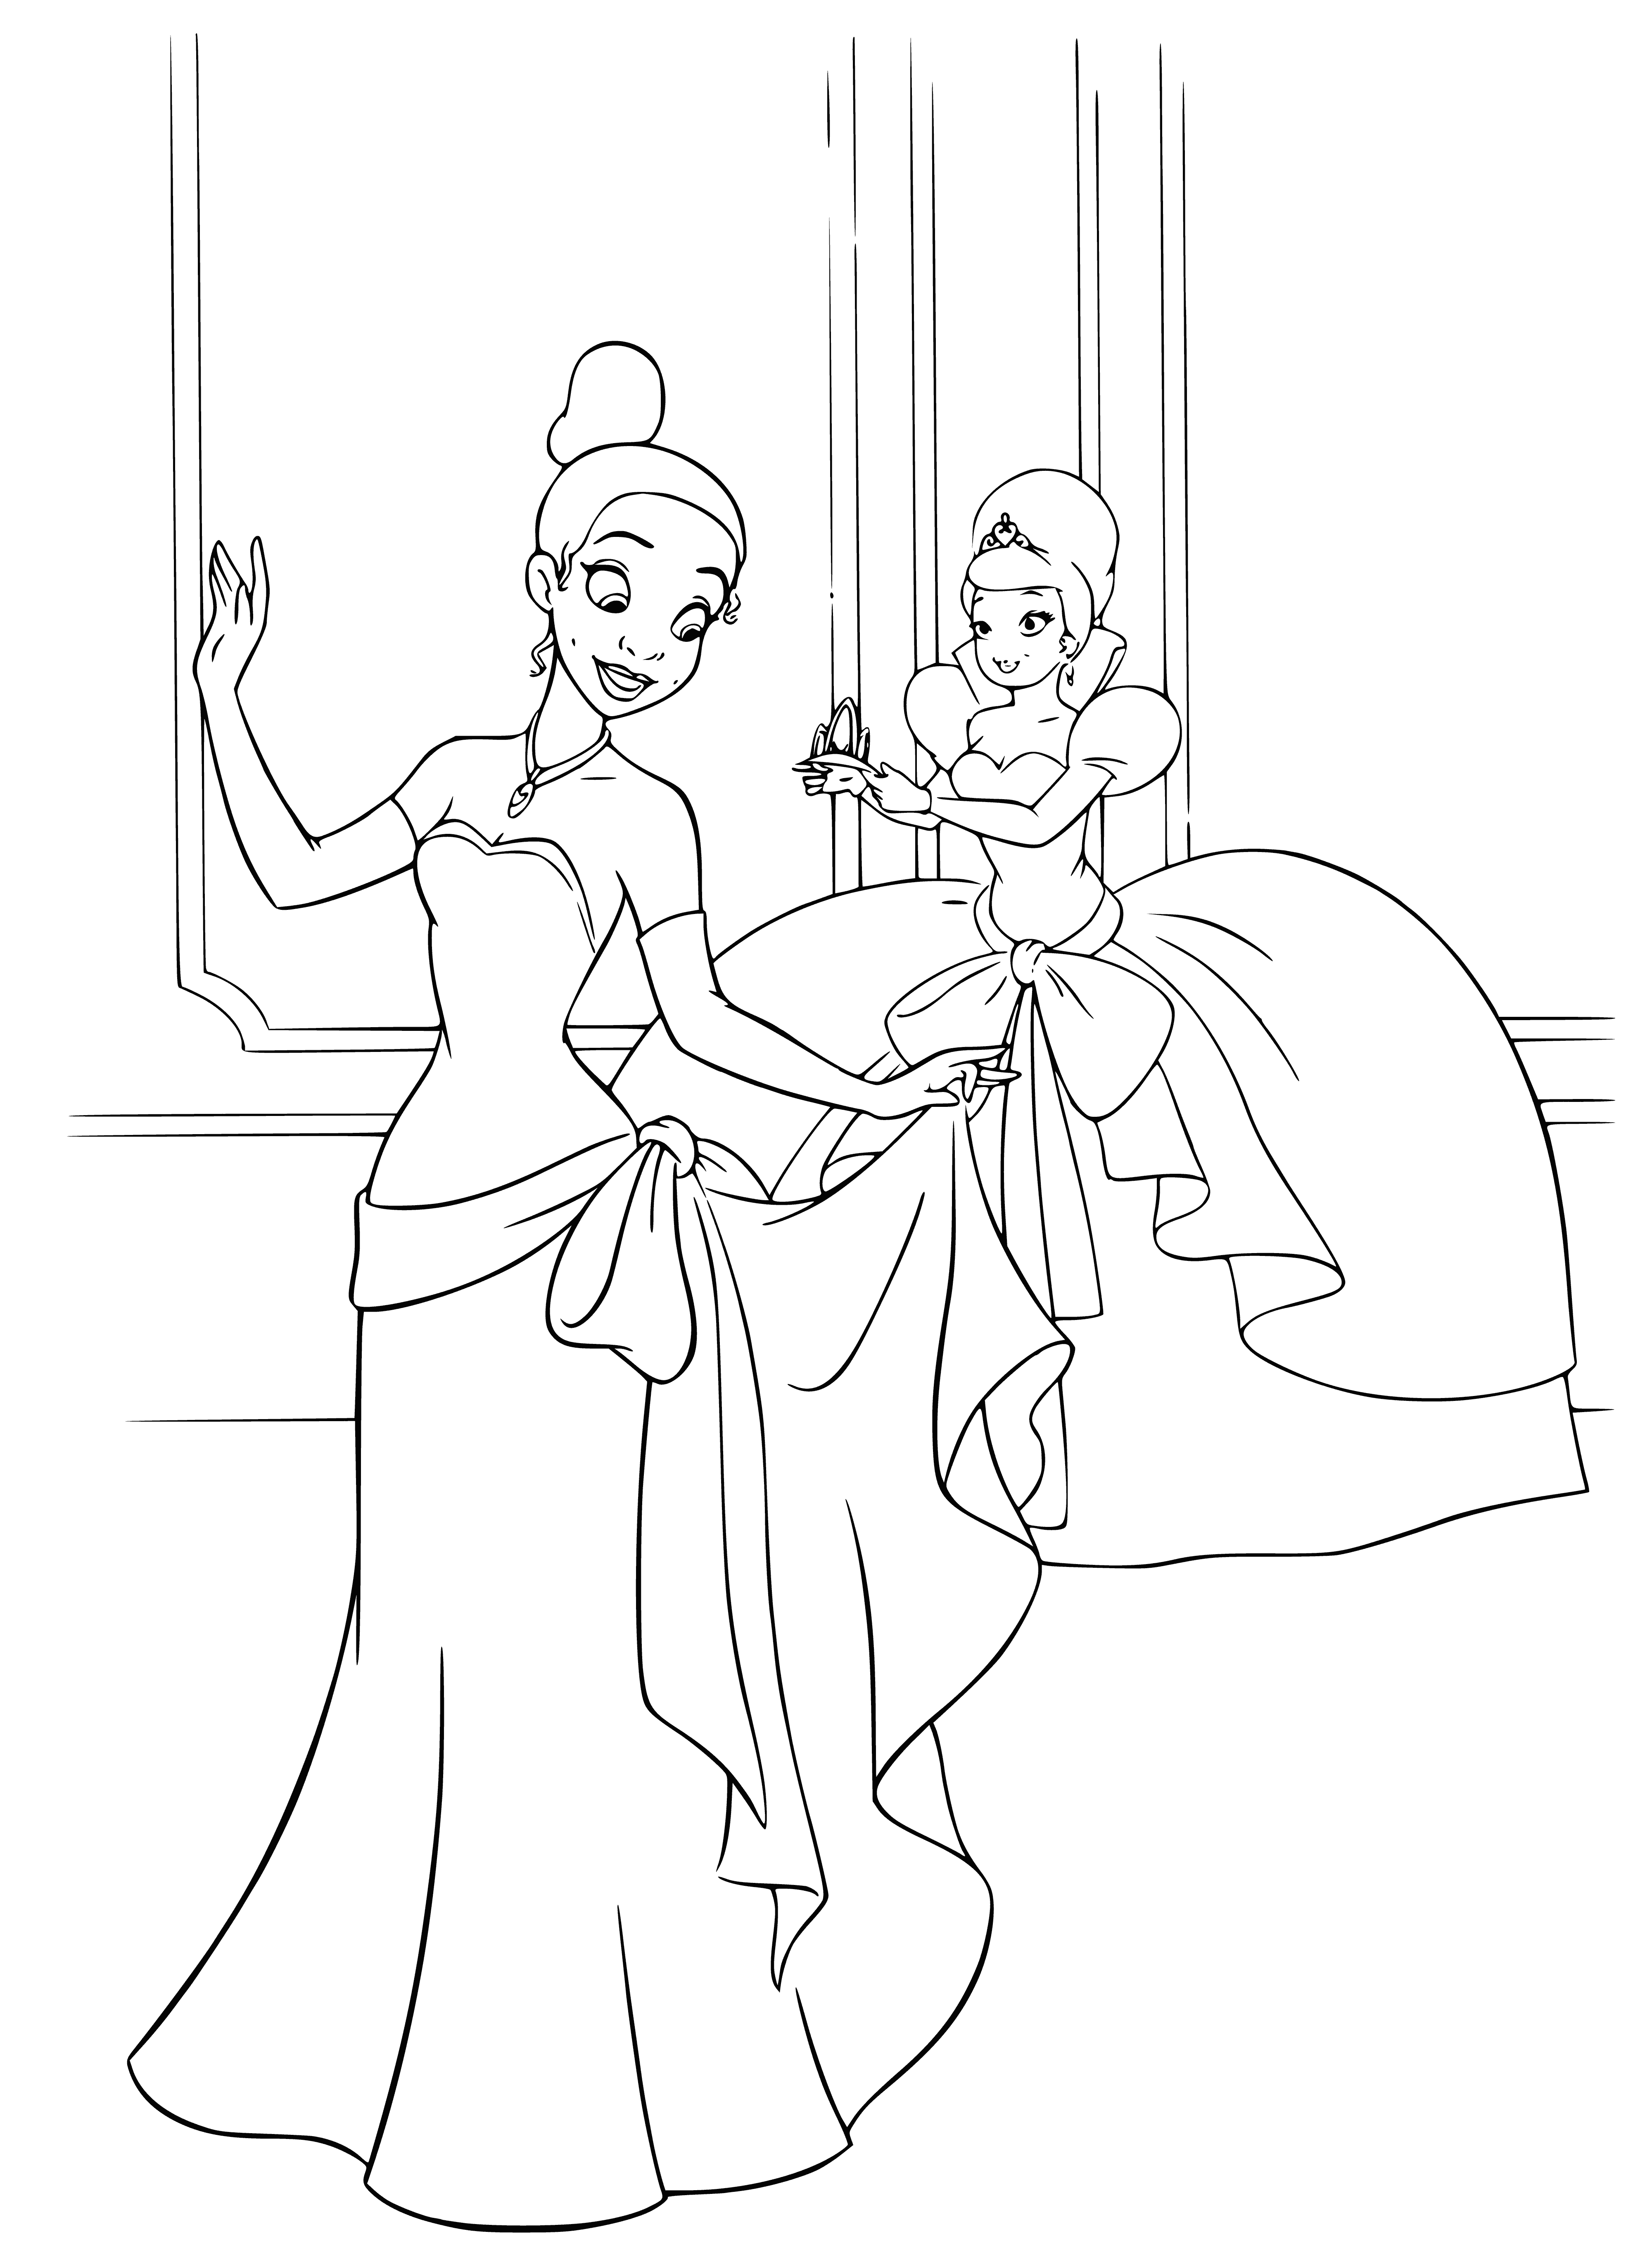 coloring page: Girl in green dress standing next to frog on lily pad, both smiling.